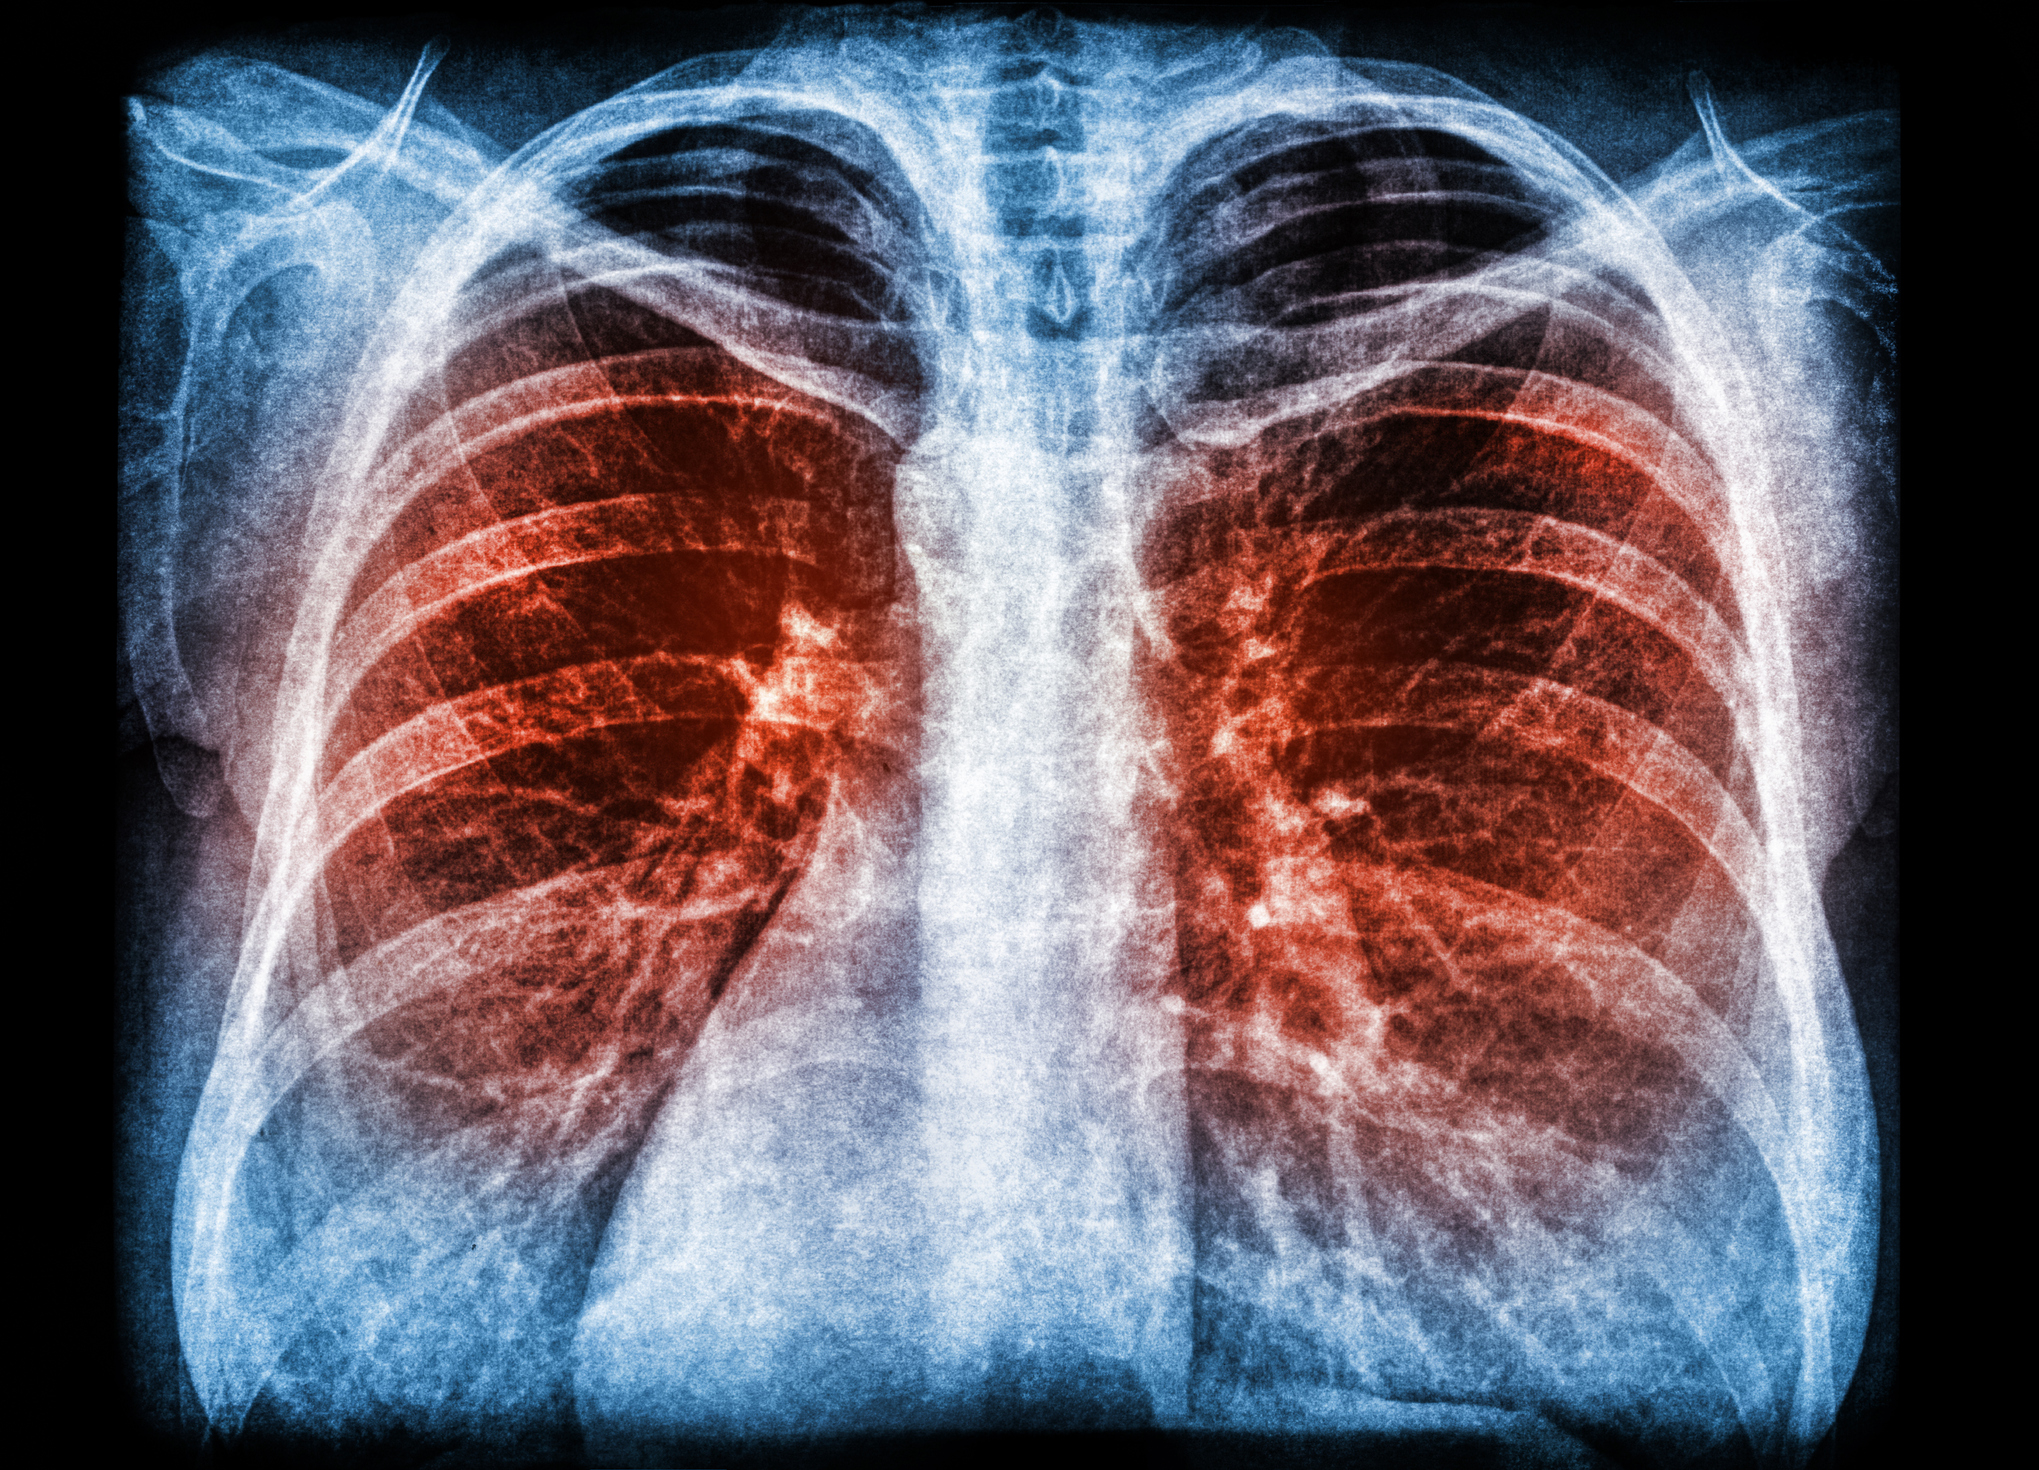 X-ray scan of pneumonia lung infection